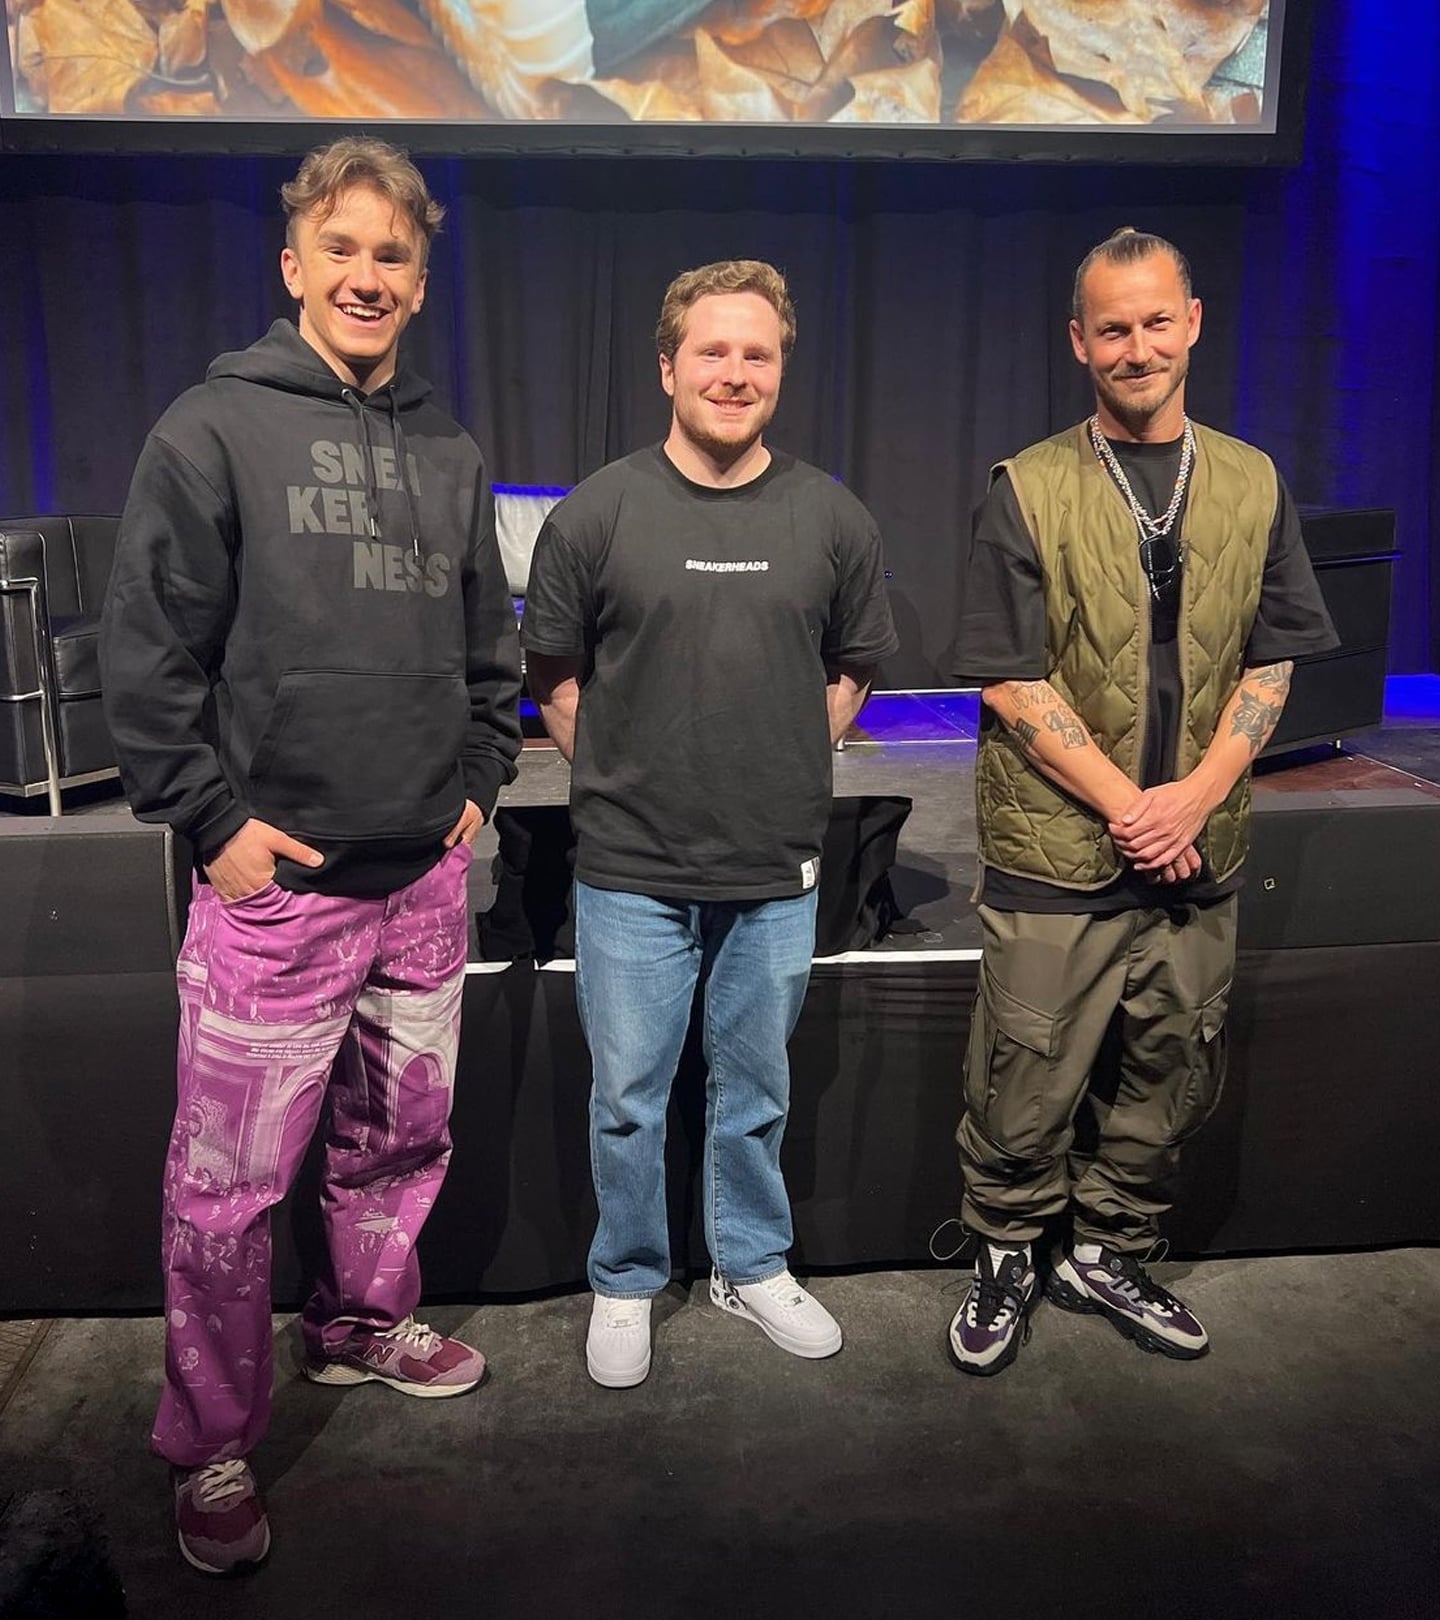 Three guys standing in front of a stage at the Sneakerness Zuerich, on the left is Tamás Dablty and on the right is Till Jagla